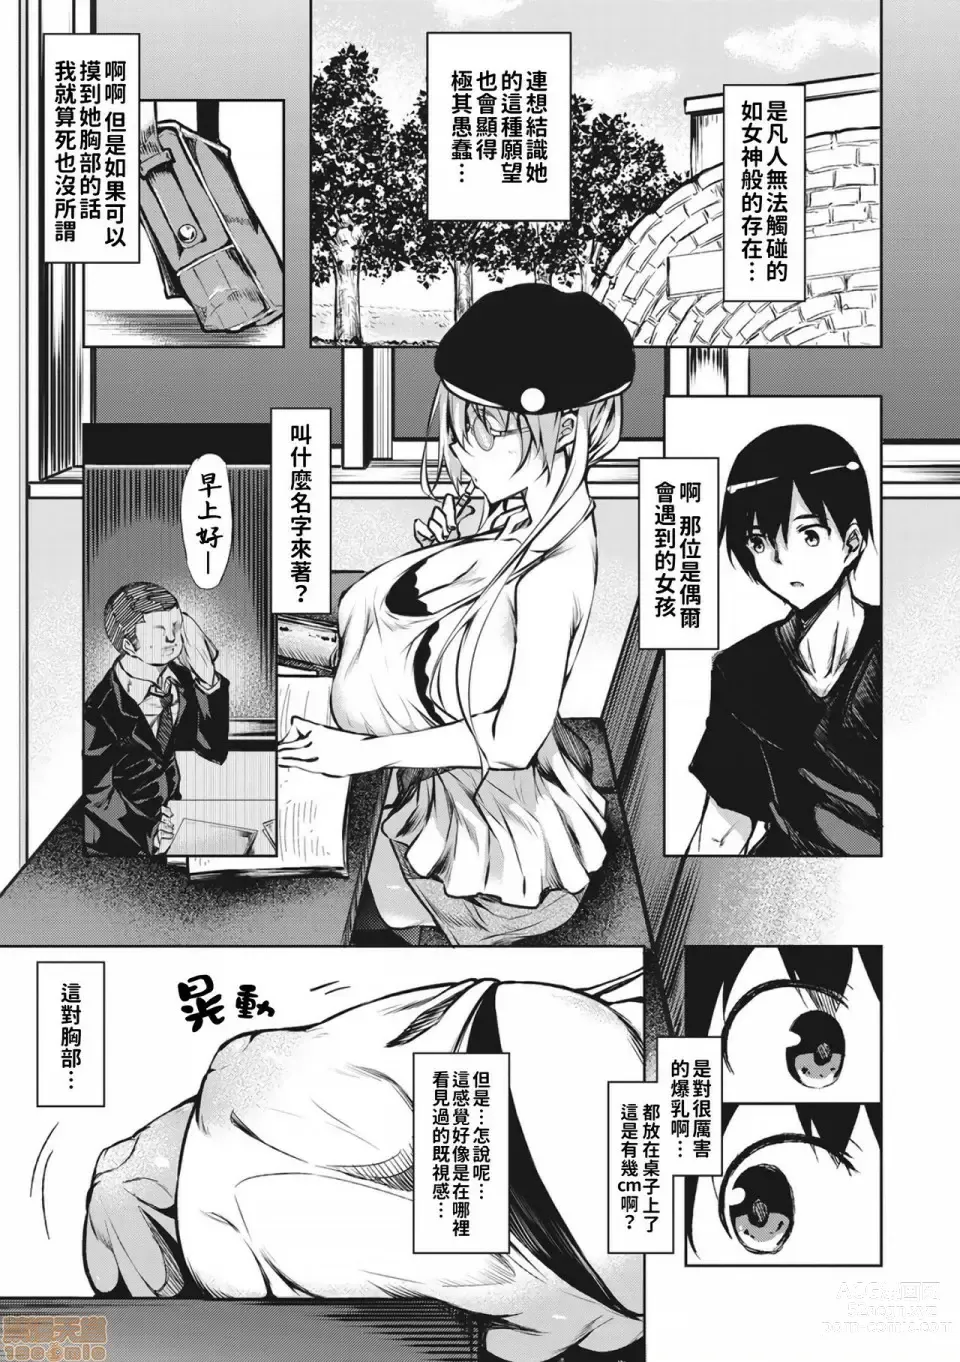 Page 7 of doujinshi Milk Mamire1+Special+FL+SideStory Full-Version